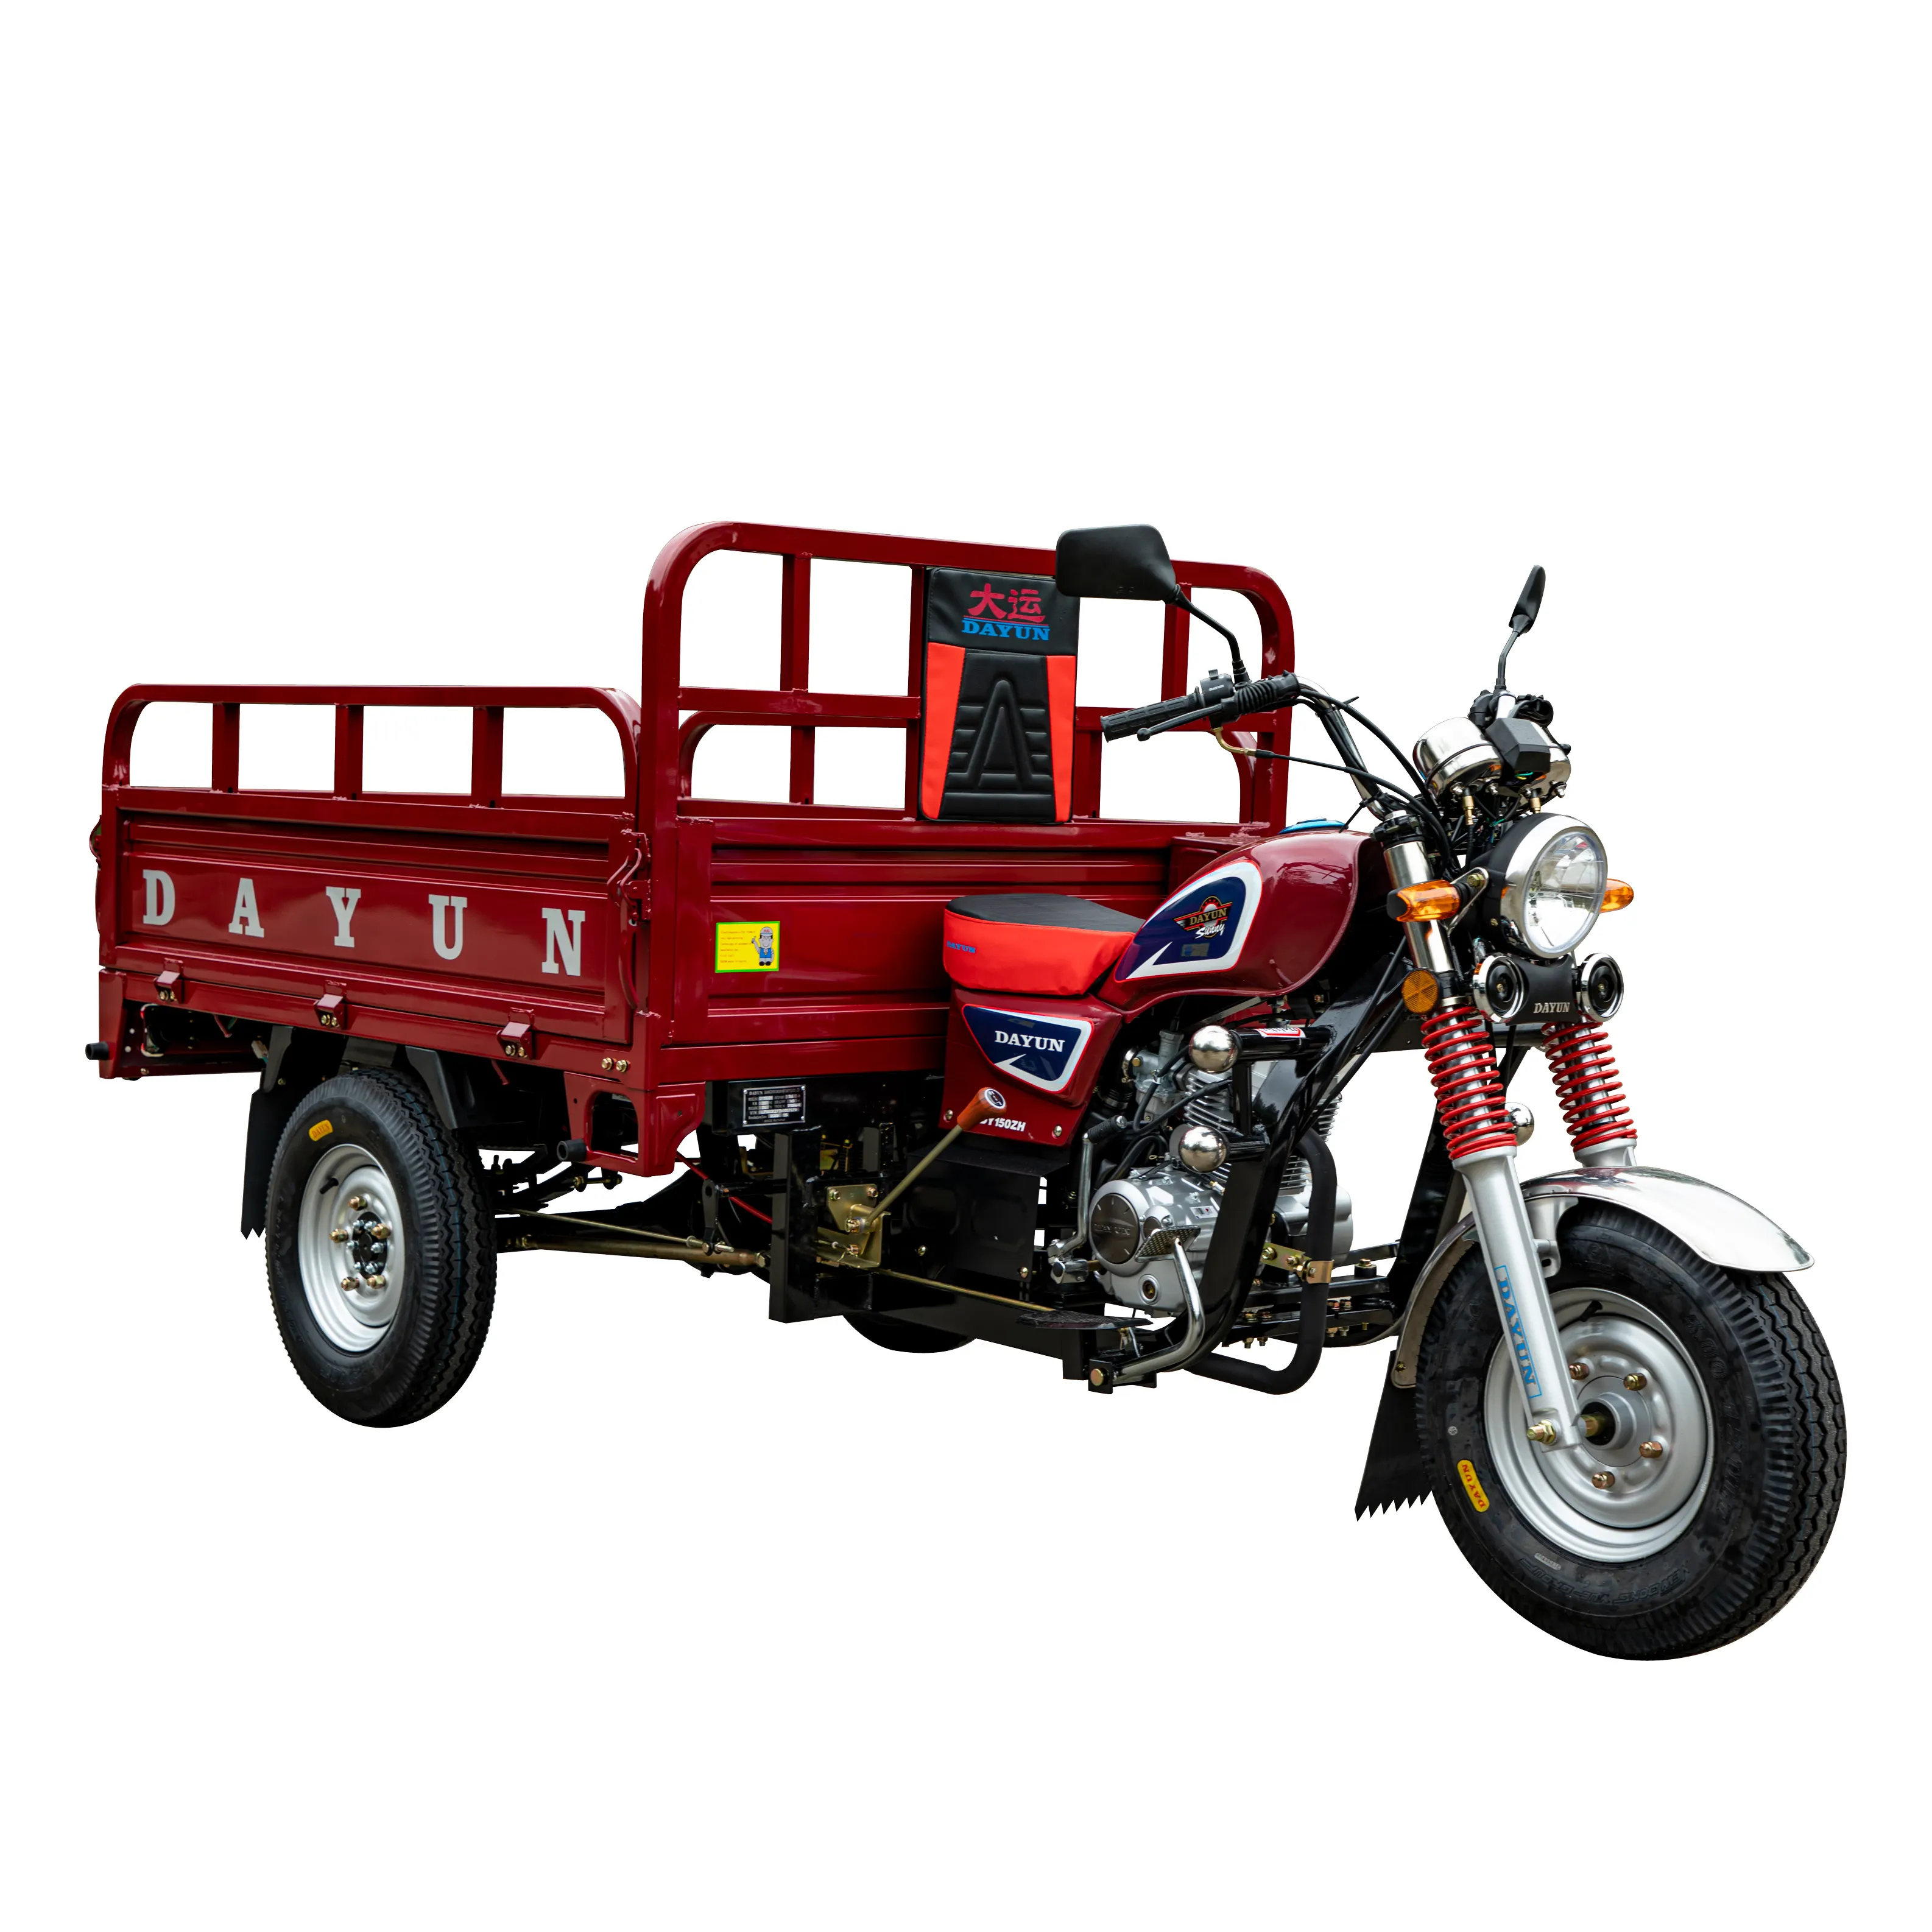 Customized DAYUN hot-selling good looking 150cc 200cc gas open tricycle DY150ZH 200ZH for carrying cargo